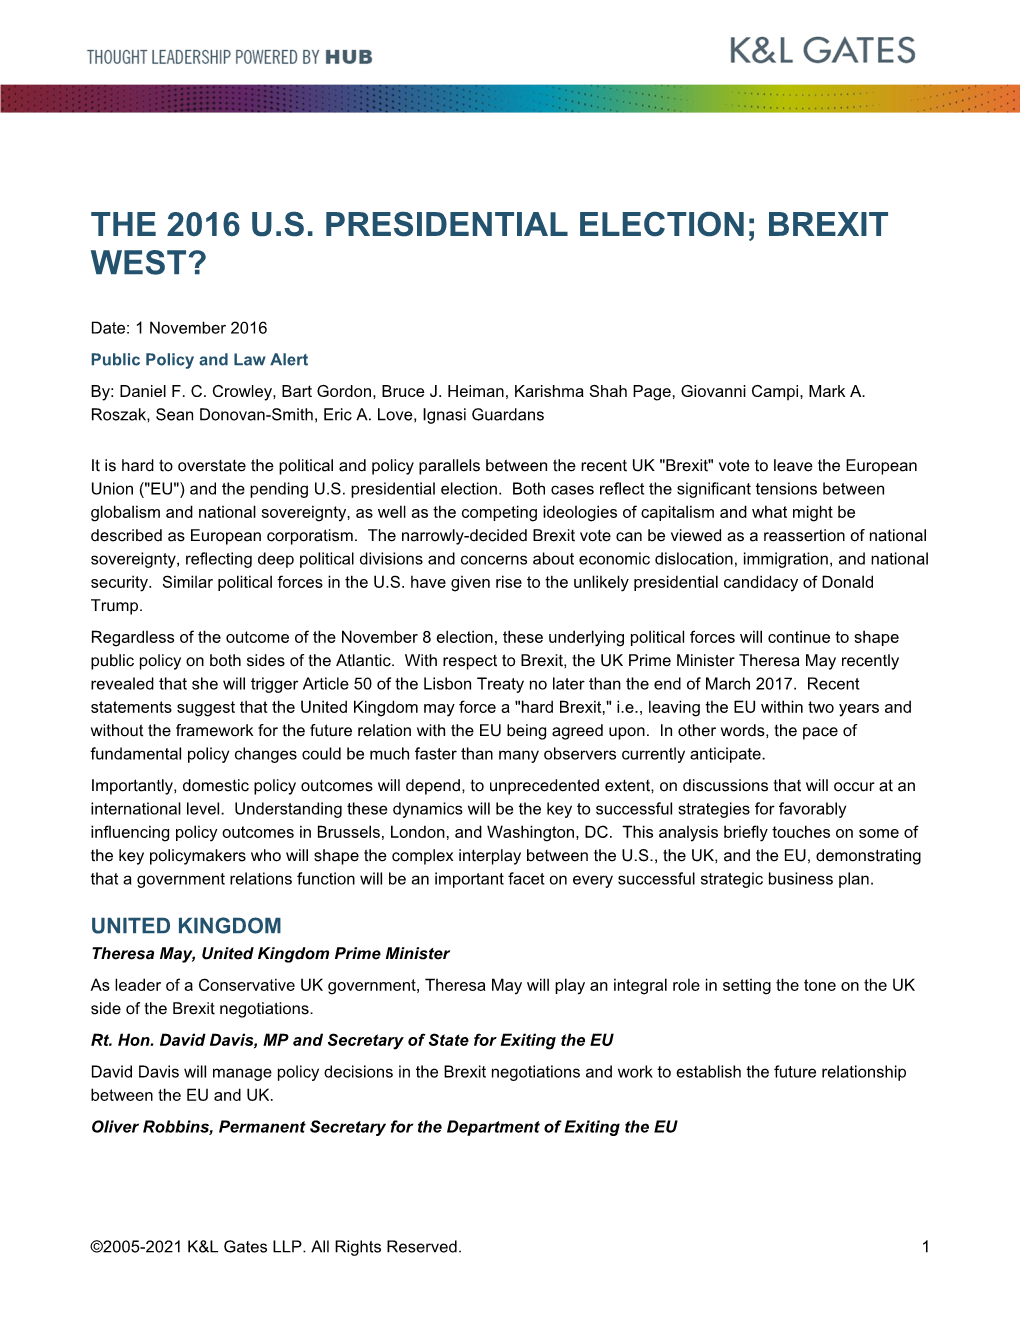 The 2016 U.S. Presidential Election; Brexit West?